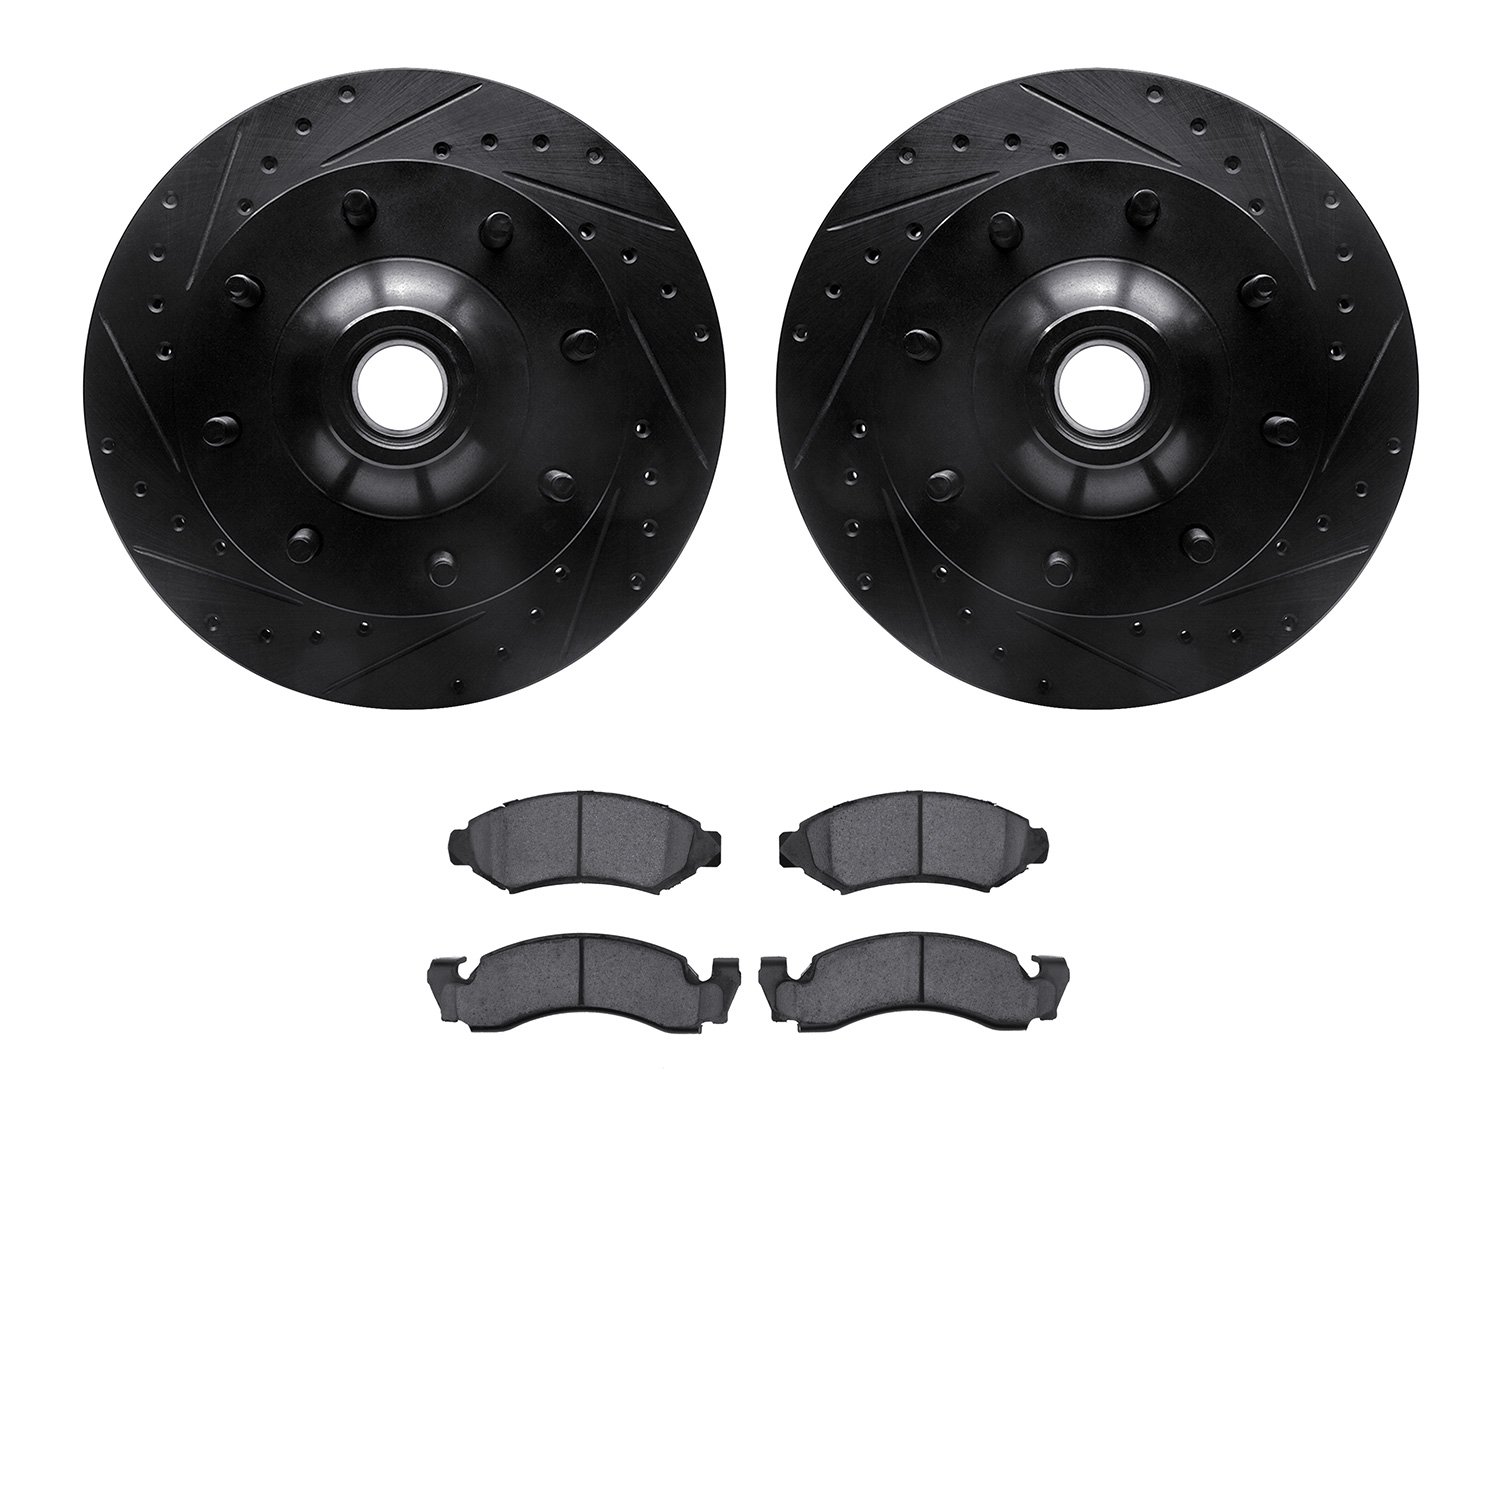 8402-54015 Drilled/Slotted Brake Rotors with Ultimate-Duty Brake Pads Kit [Black], 1980-1985 Ford/Lincoln/Mercury/Mazda, Positio